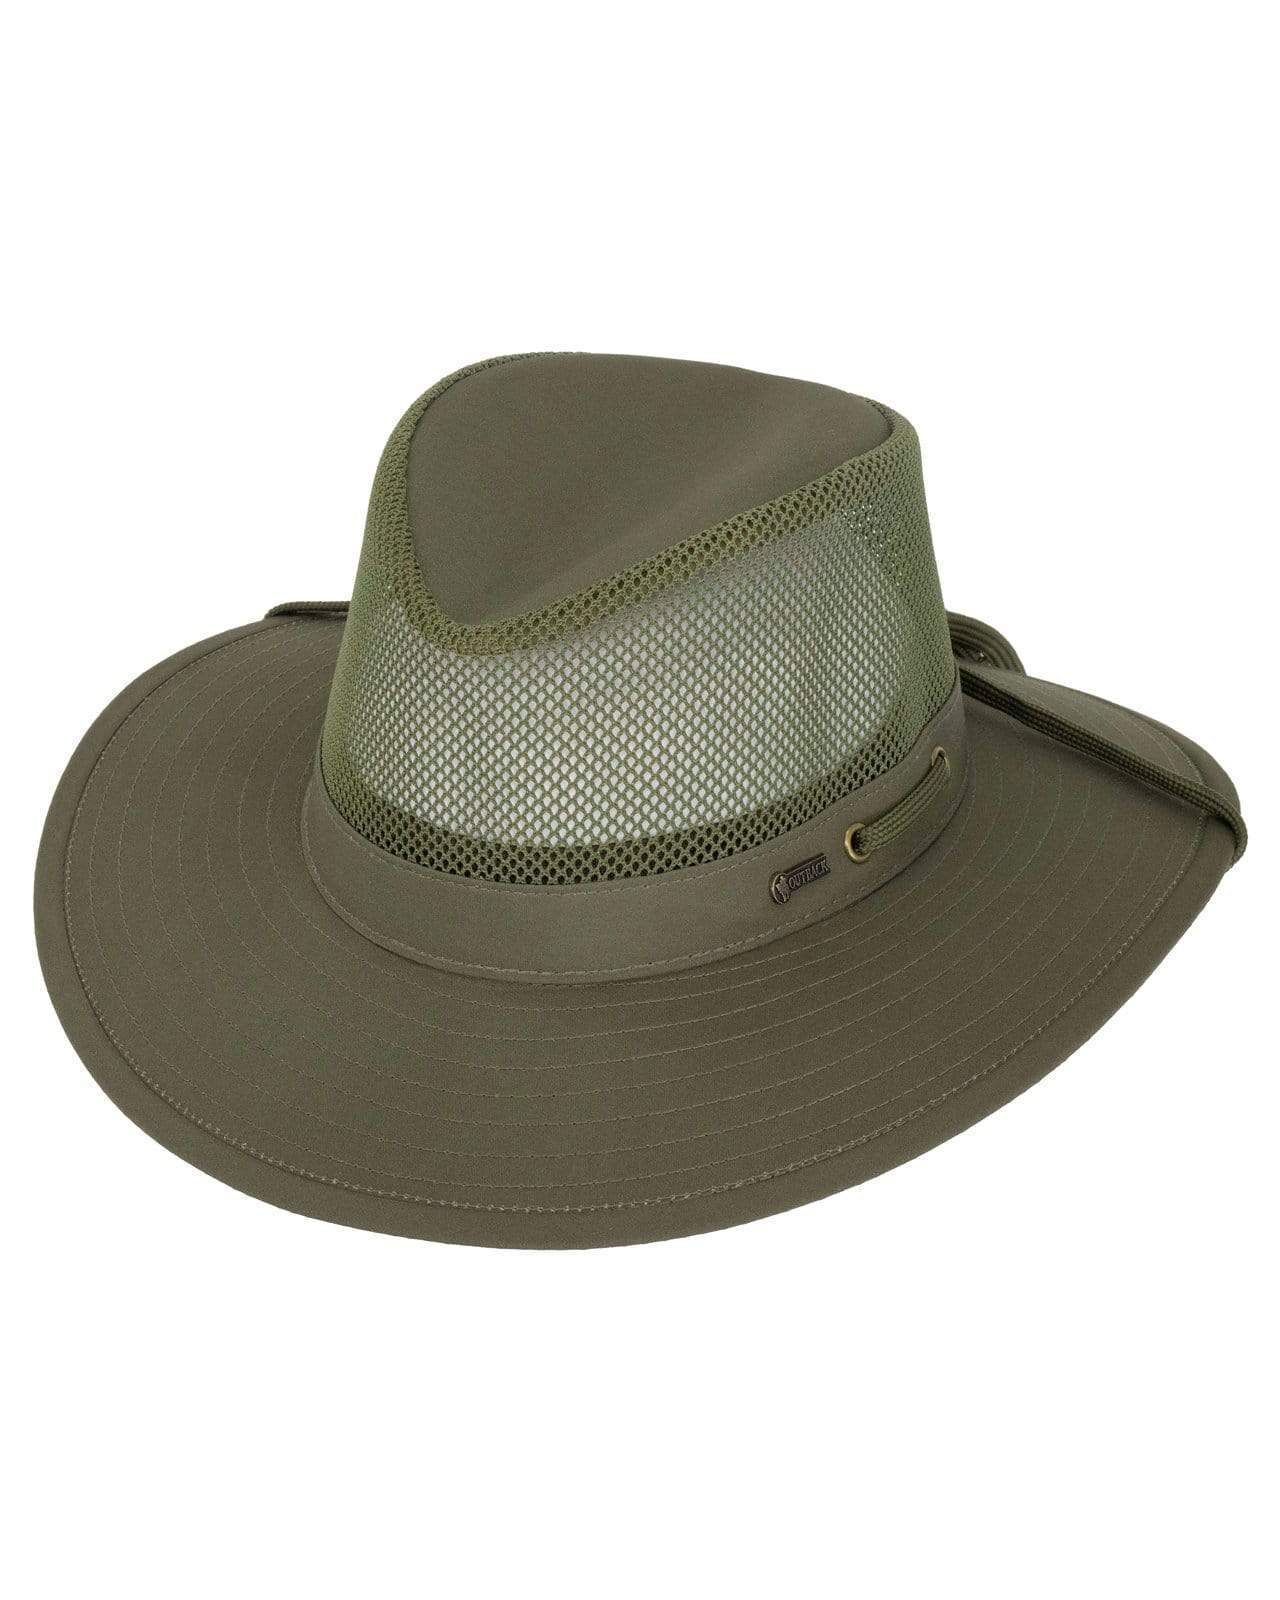 Outback Trading Company River Guide with Mesh II Olive / S 14726-OLV-SM 089043266604 Hats